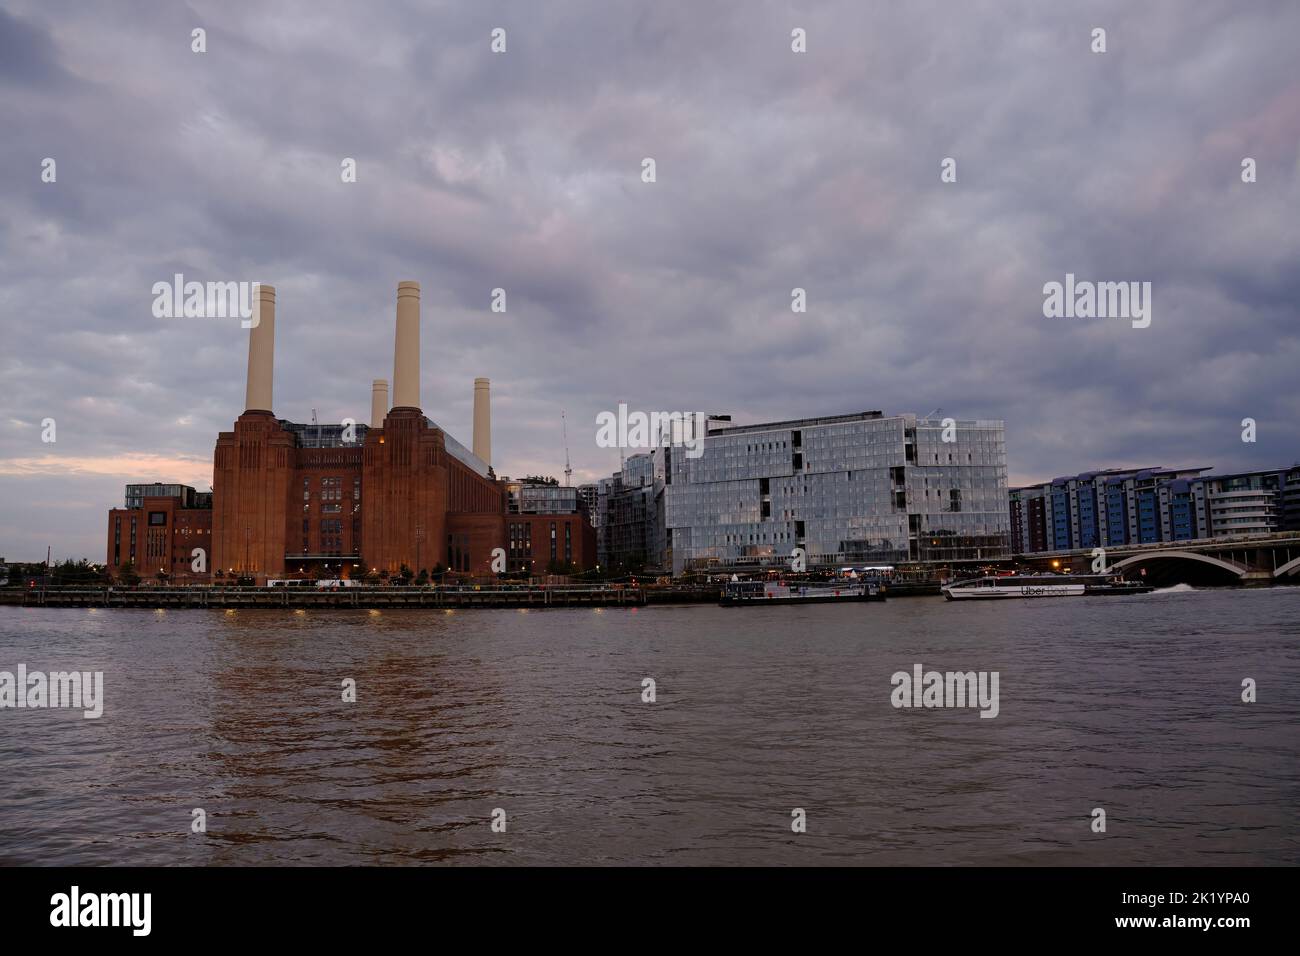 View of Battersea Power Station from the north side of the River Thames in London at dusk Stock Photo